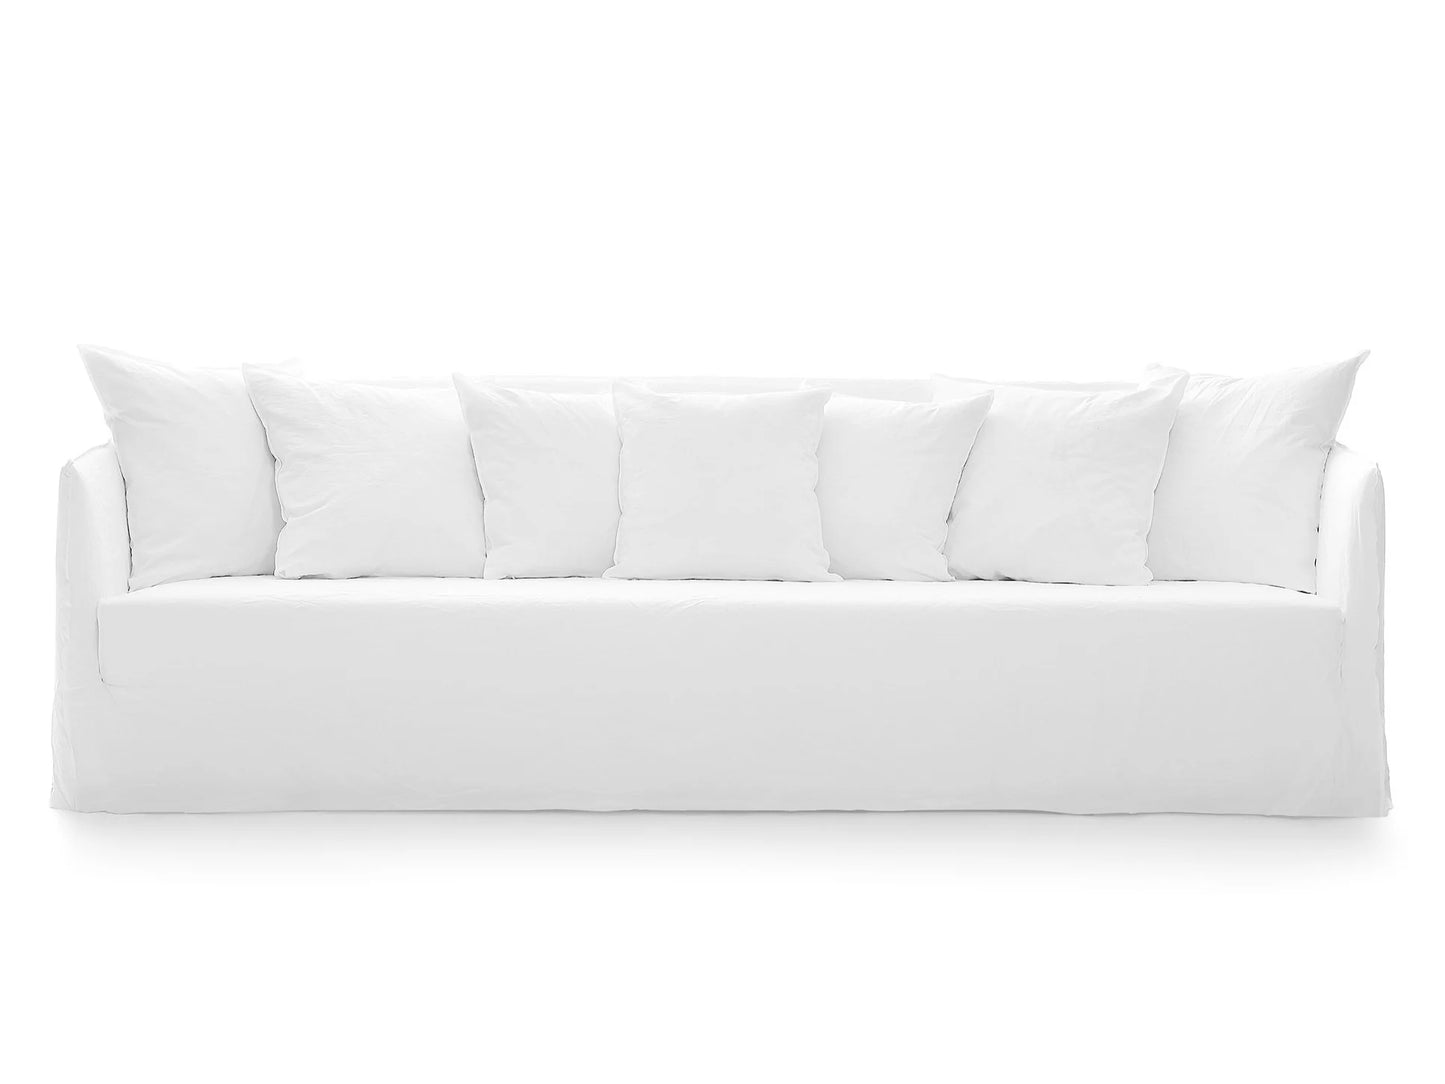 Gervasoni Ghost 14 Sofa in White Linen Upholstery by Paola Navone $7,300.00